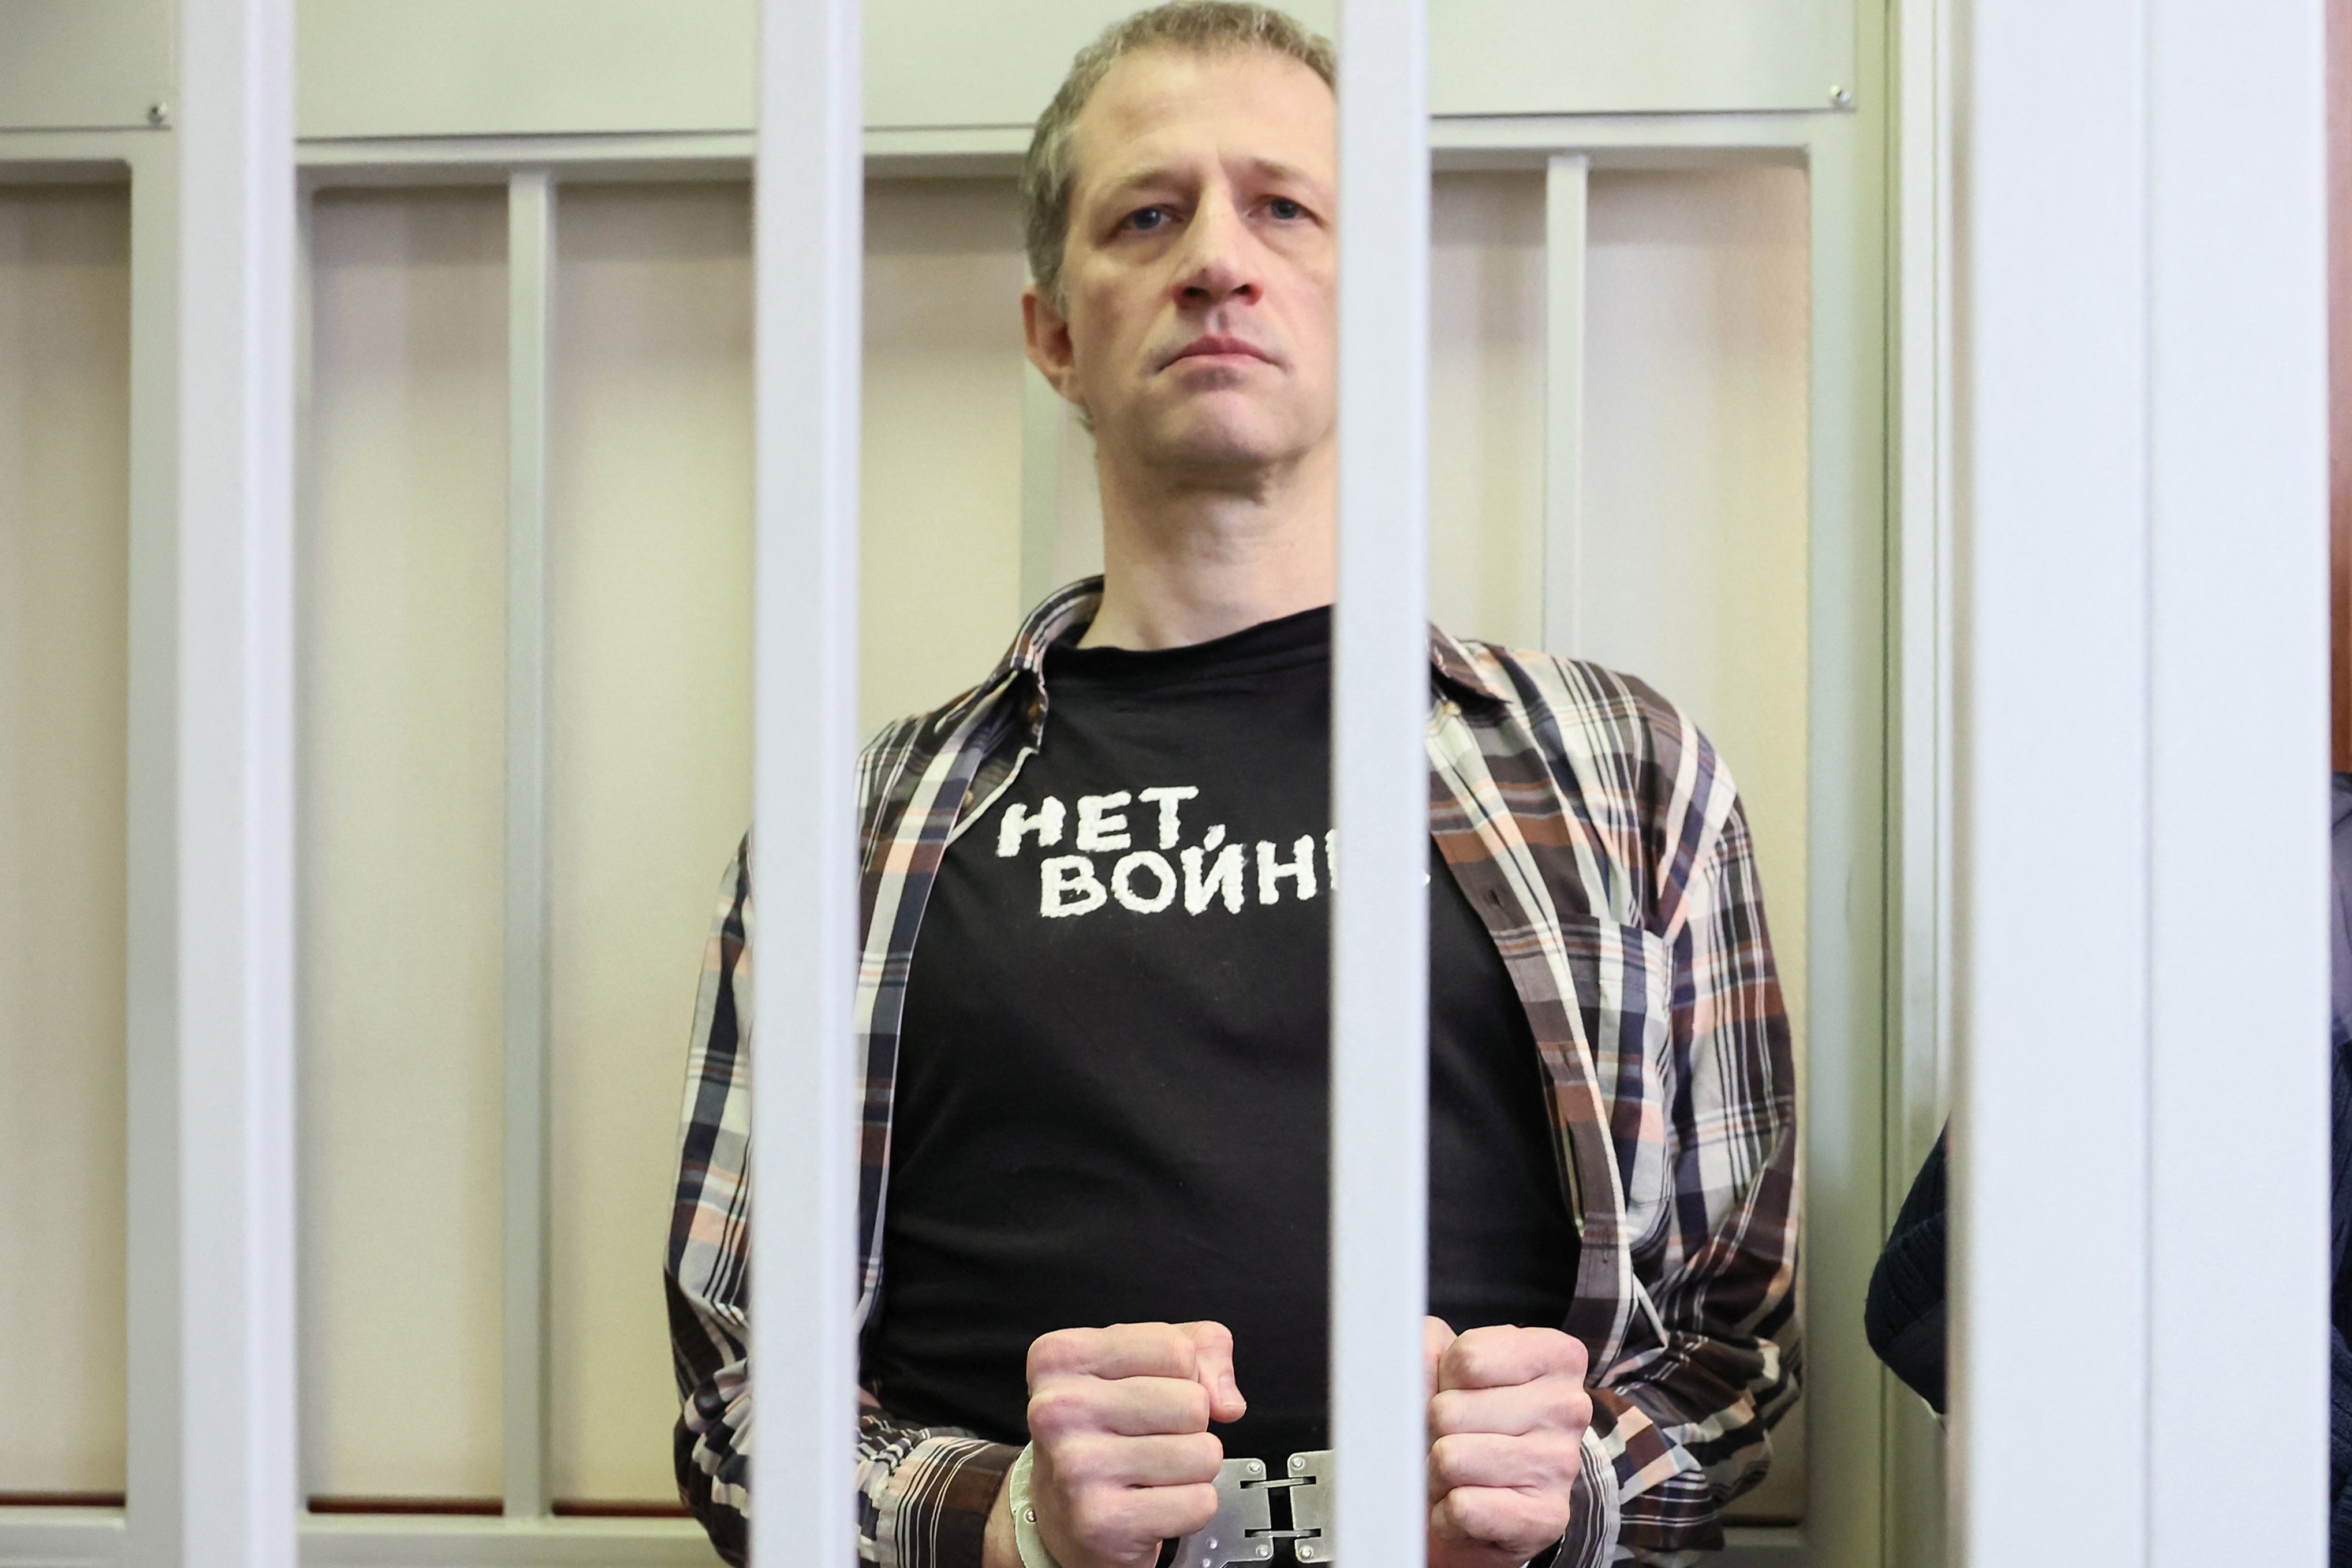 Russian journalist Roman Ivanov, wearing a T-shirt that says ‘No war,’ stands inside a defendants’ cage